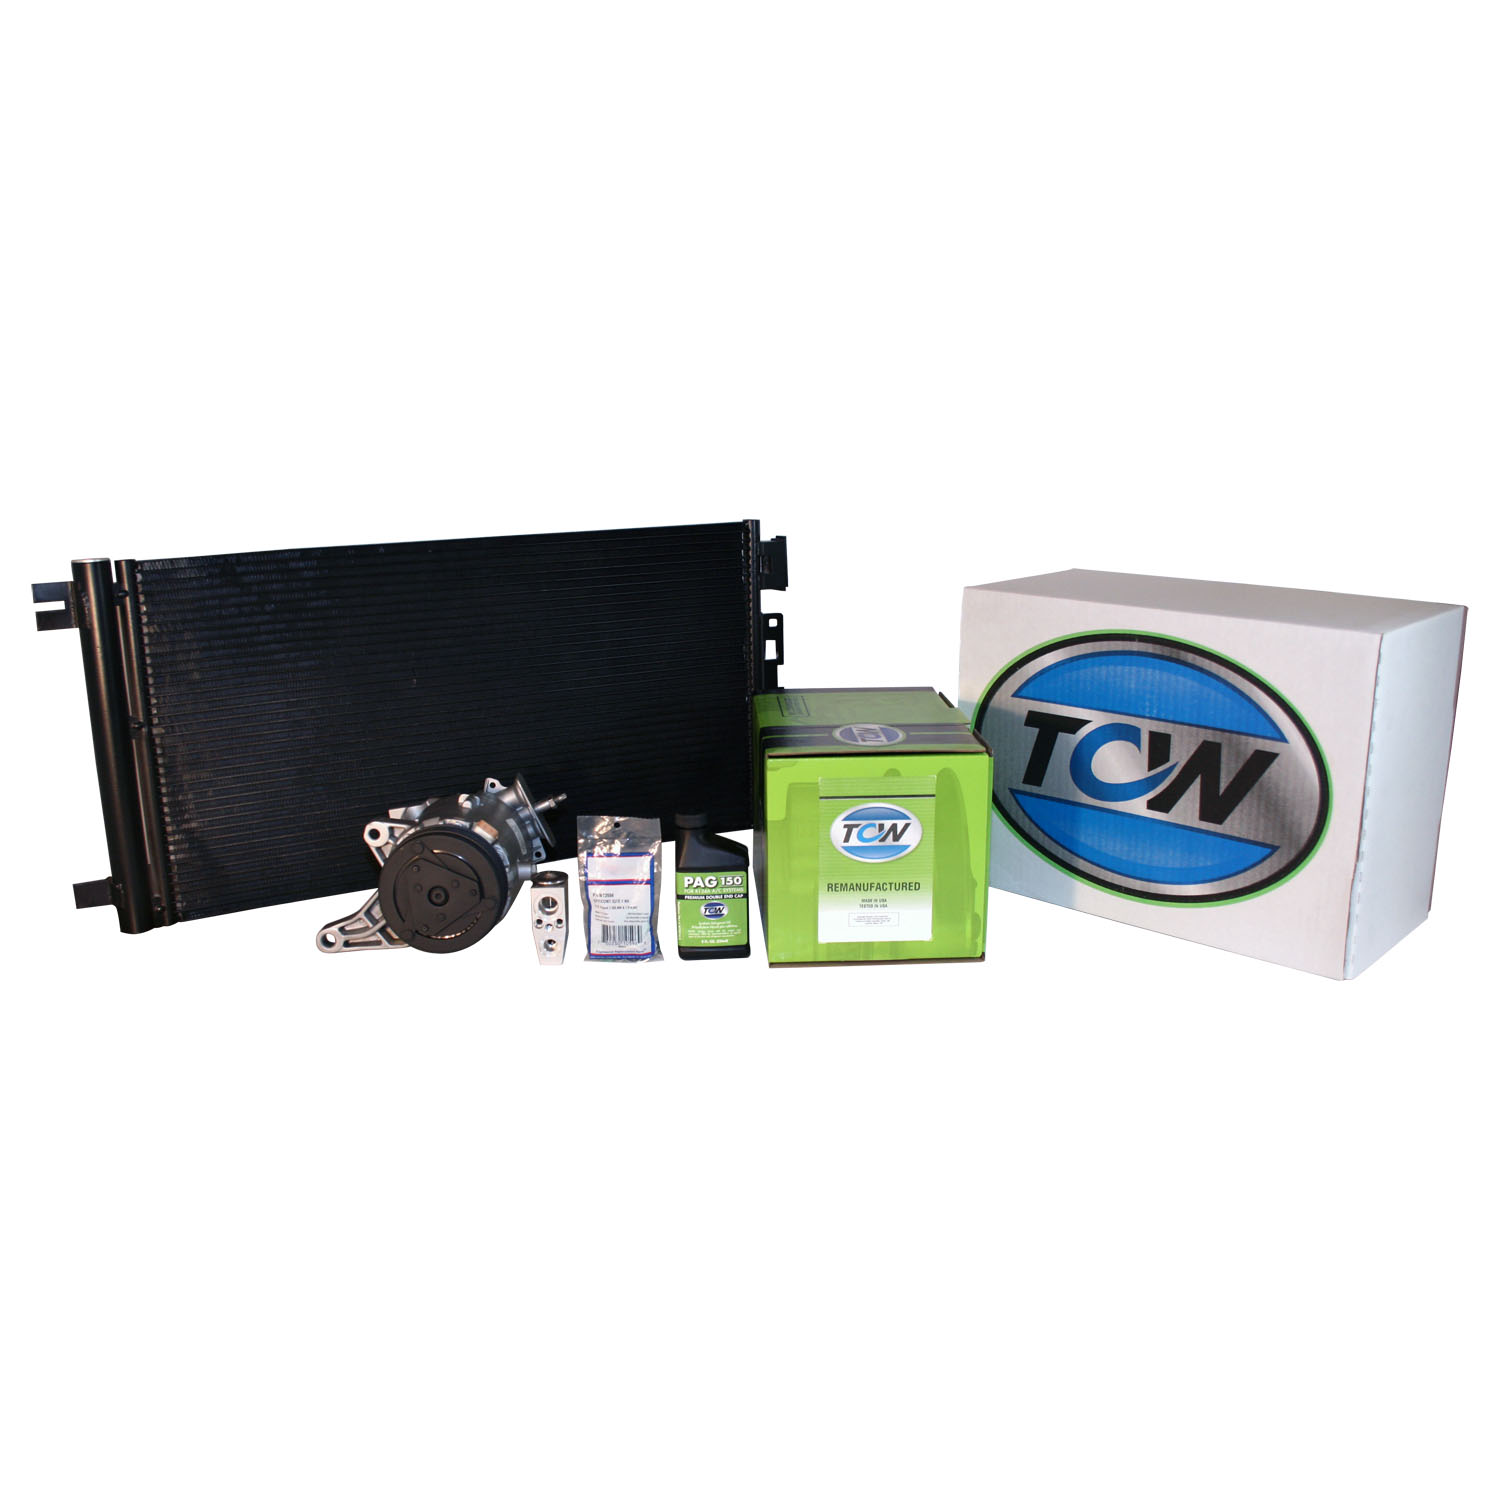 TCW Vehicle A/C Kit KC100051R Remanufactured Product Image field_60b6a13a6e67c